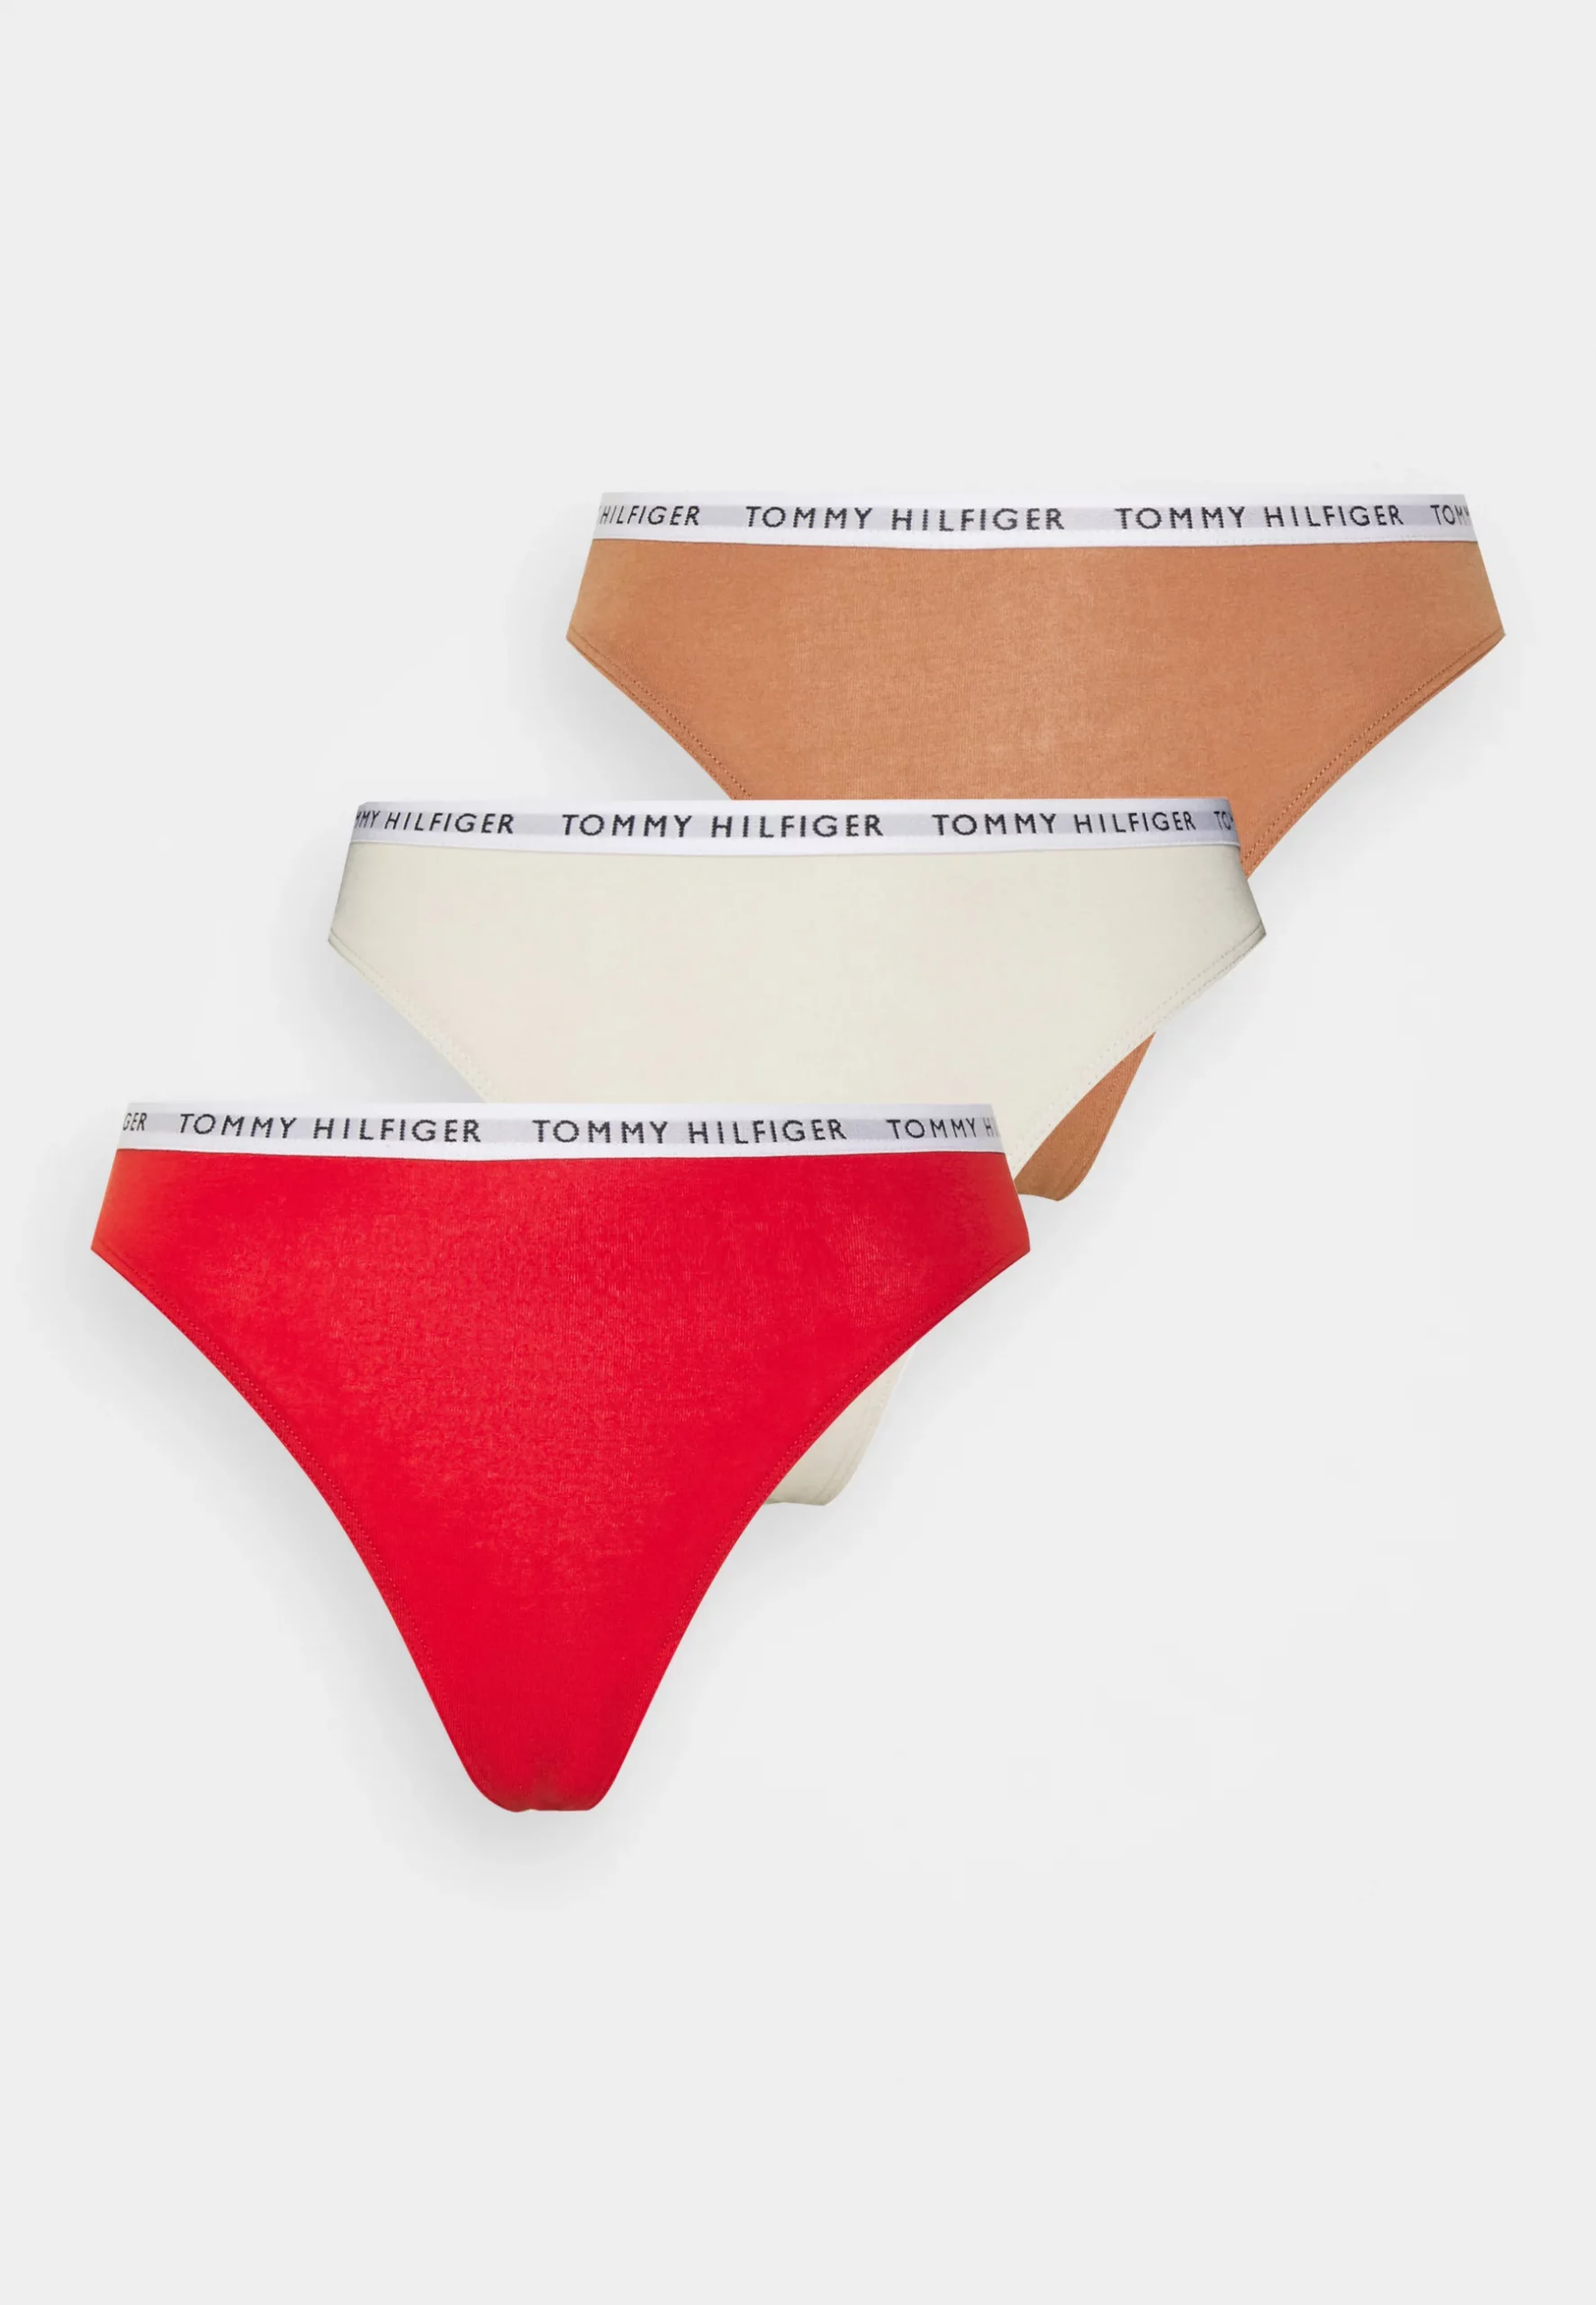 Validering åbenbaring skrige Tommy Hilfiger Woman 3-Pack Thongs - Outlet Fashion